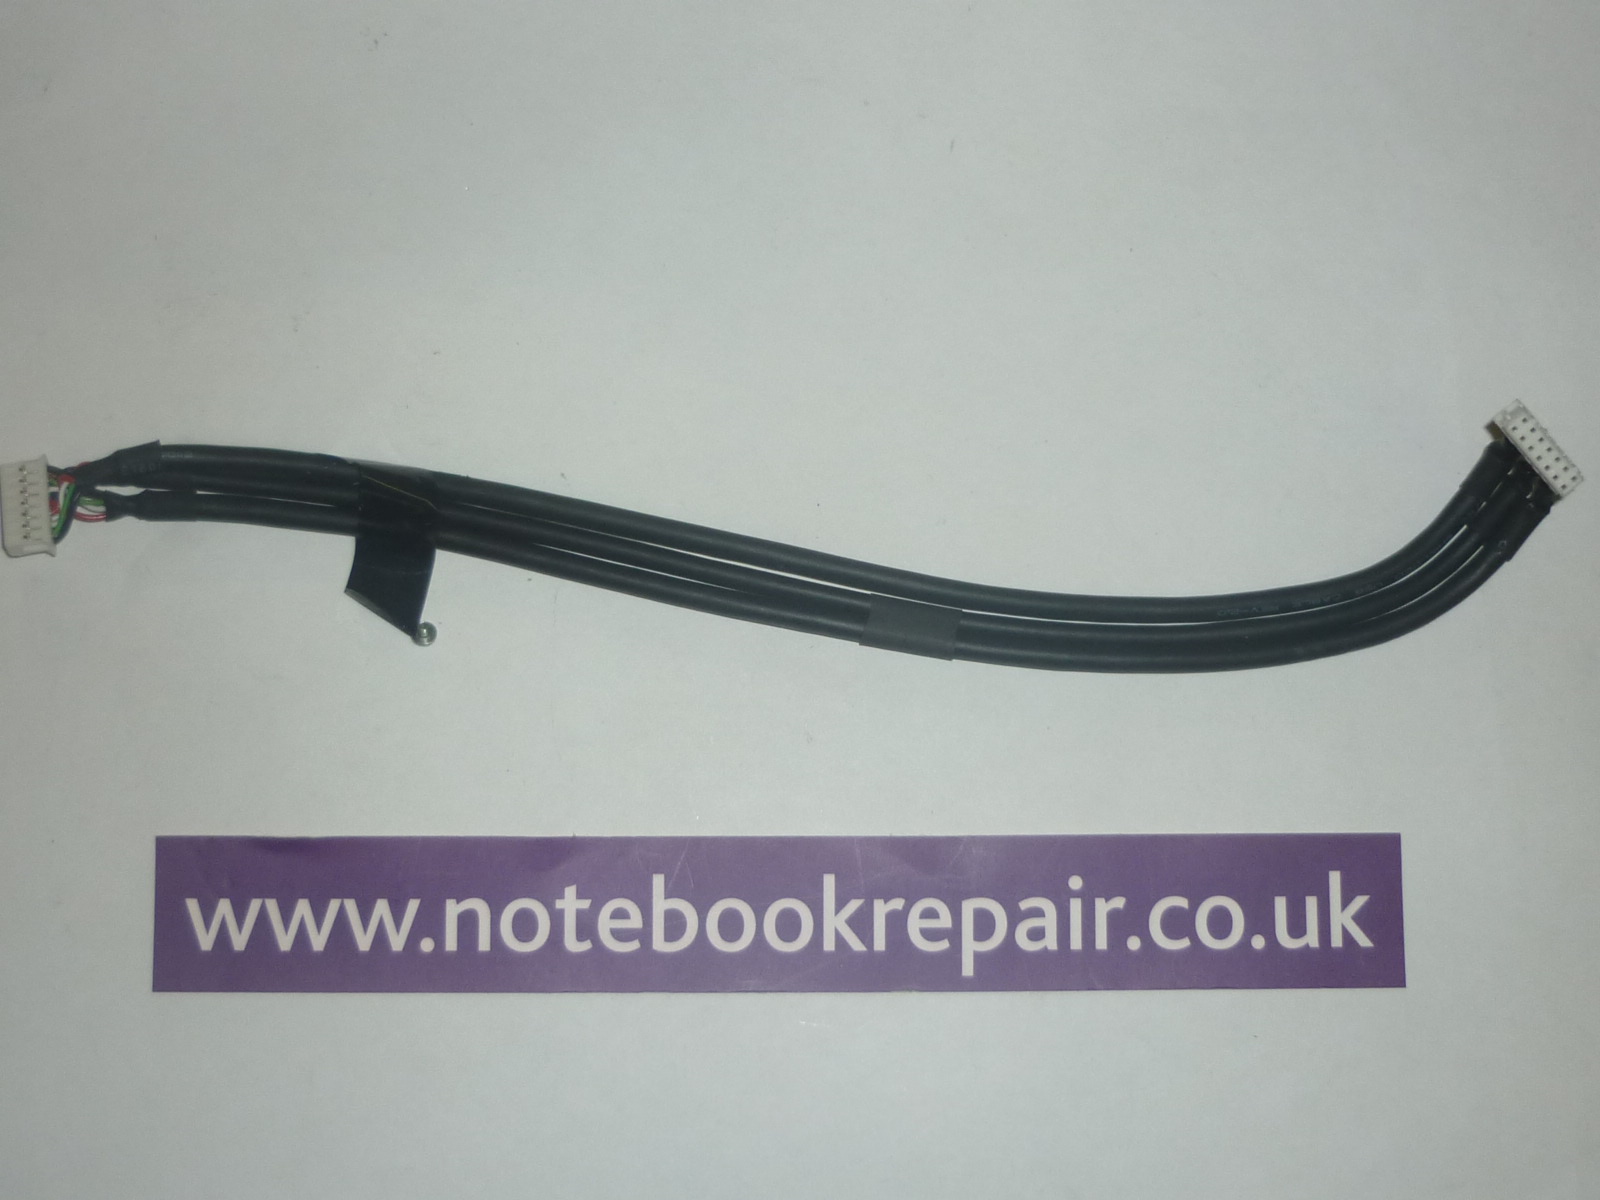 xps one a2010 - Internal Power Cable